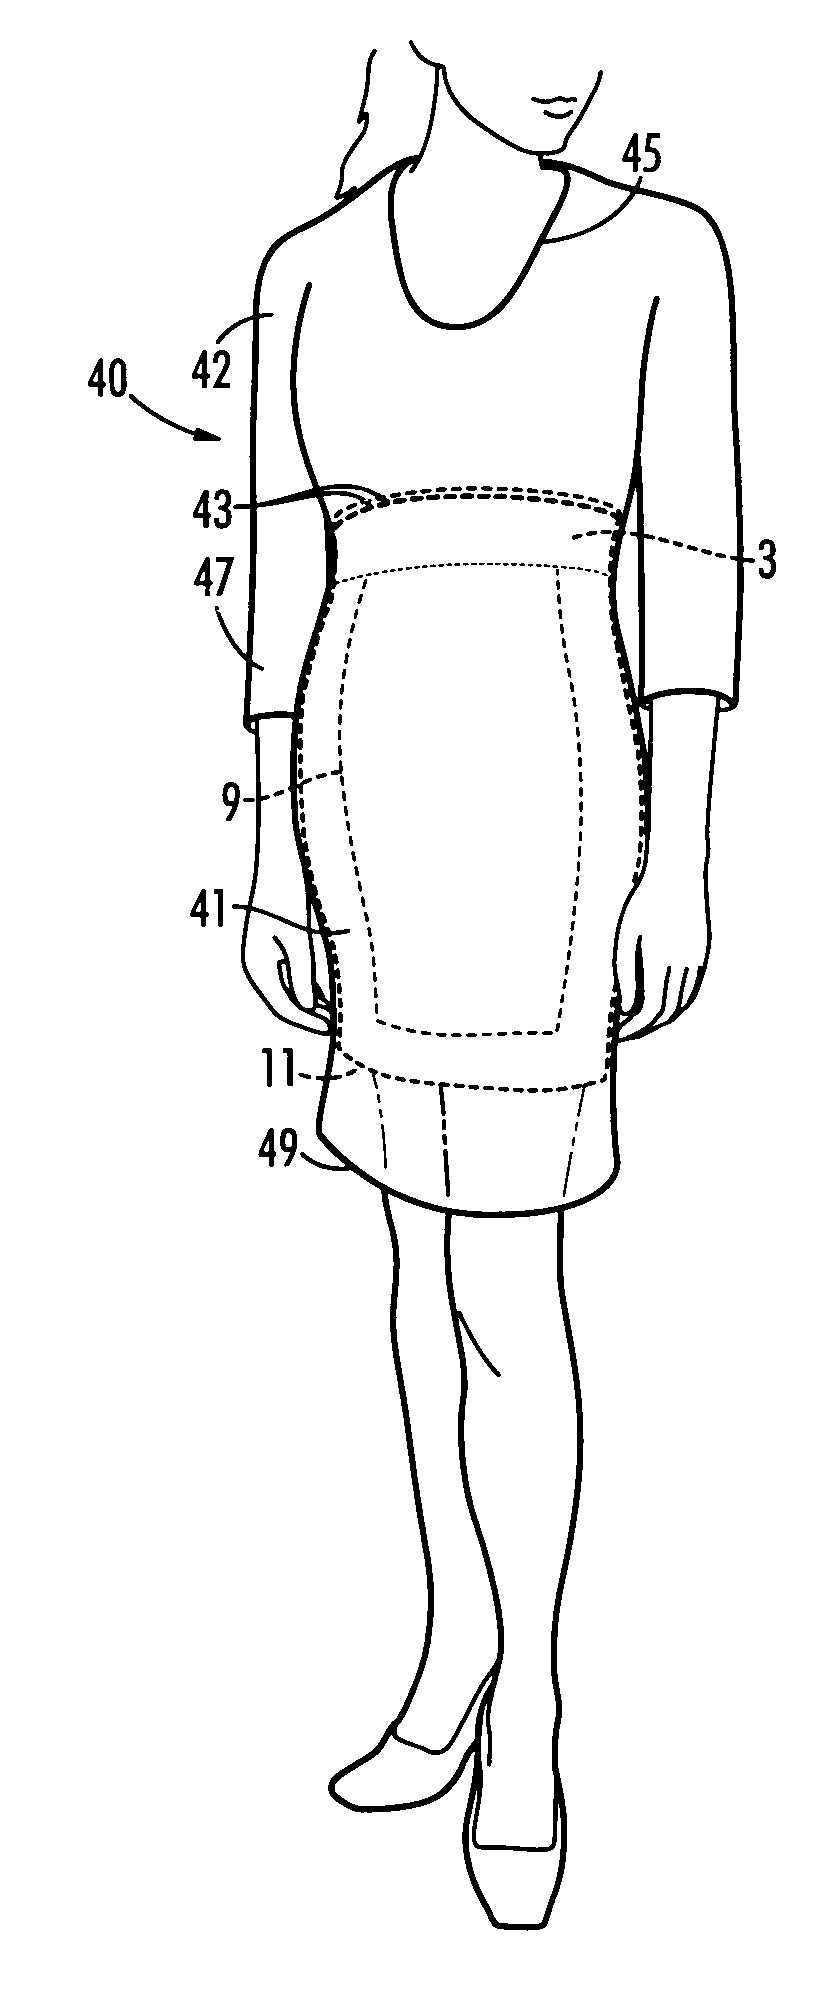 Apparel with Built-in Undergarment